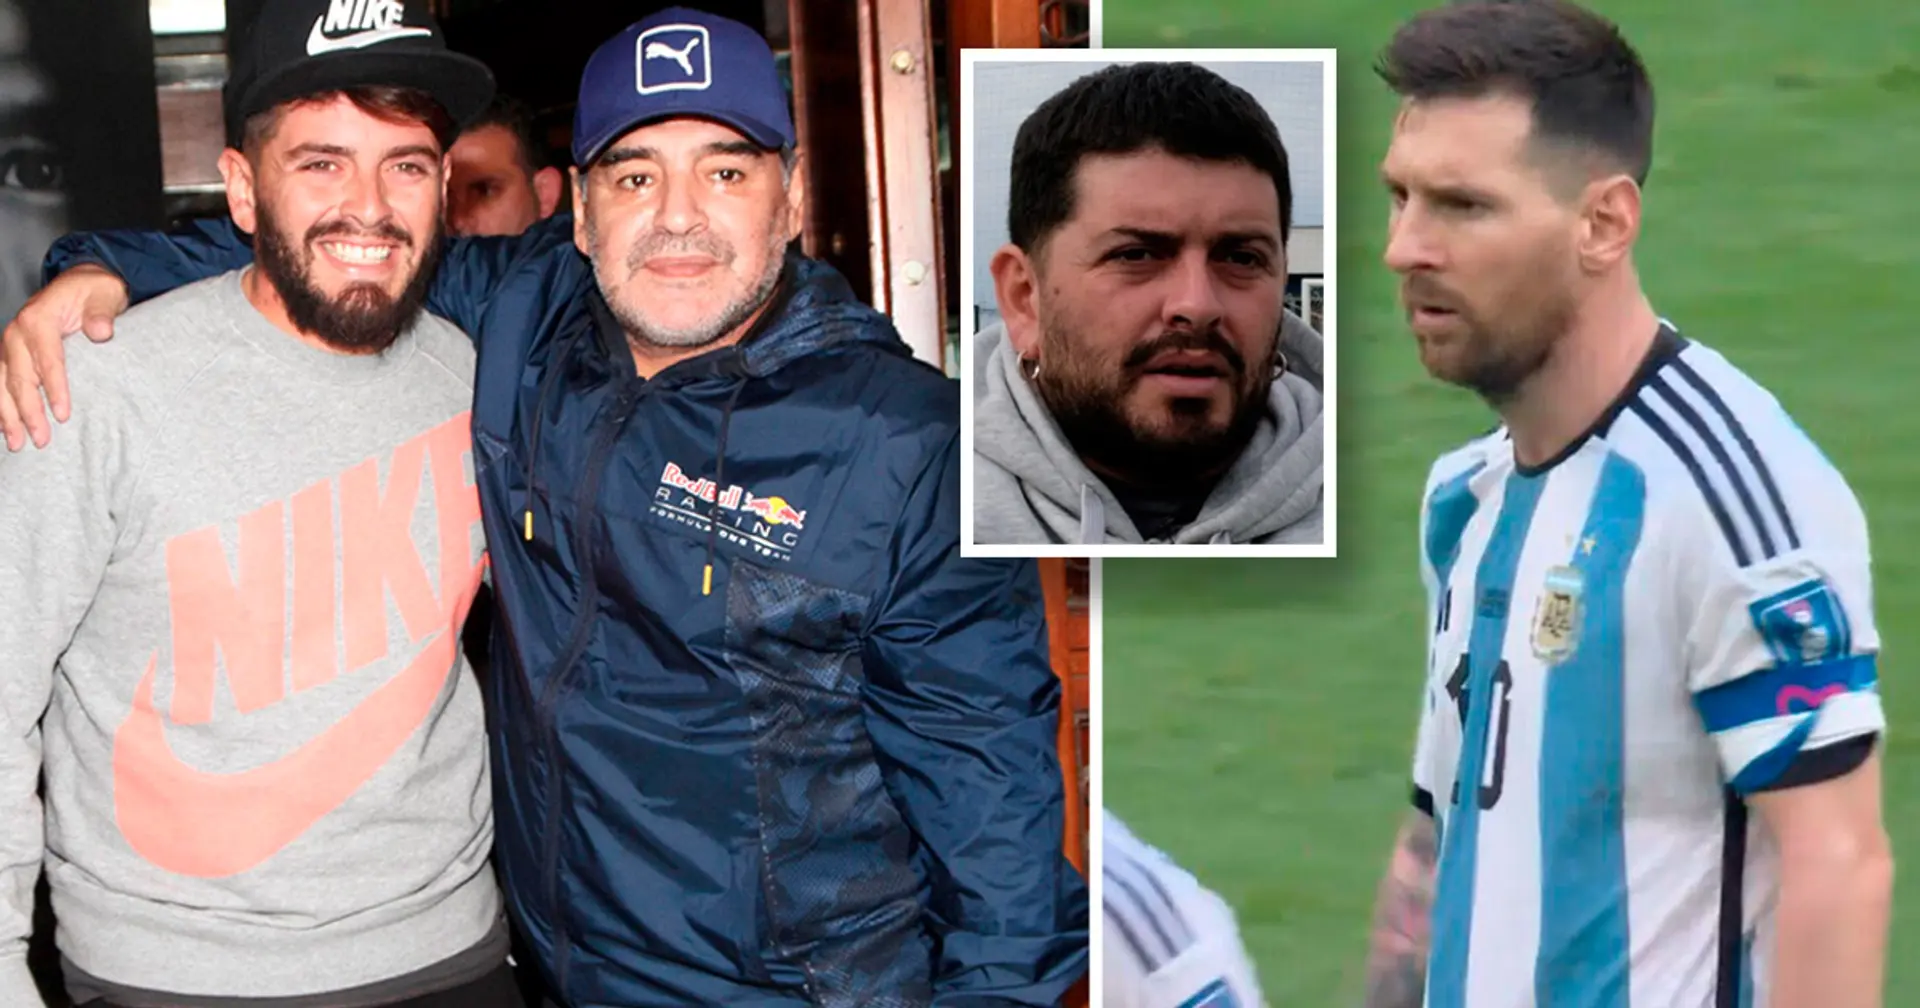 Leo Messi pays tribute to Diego Maradona despite being publicly slammed by legend's son